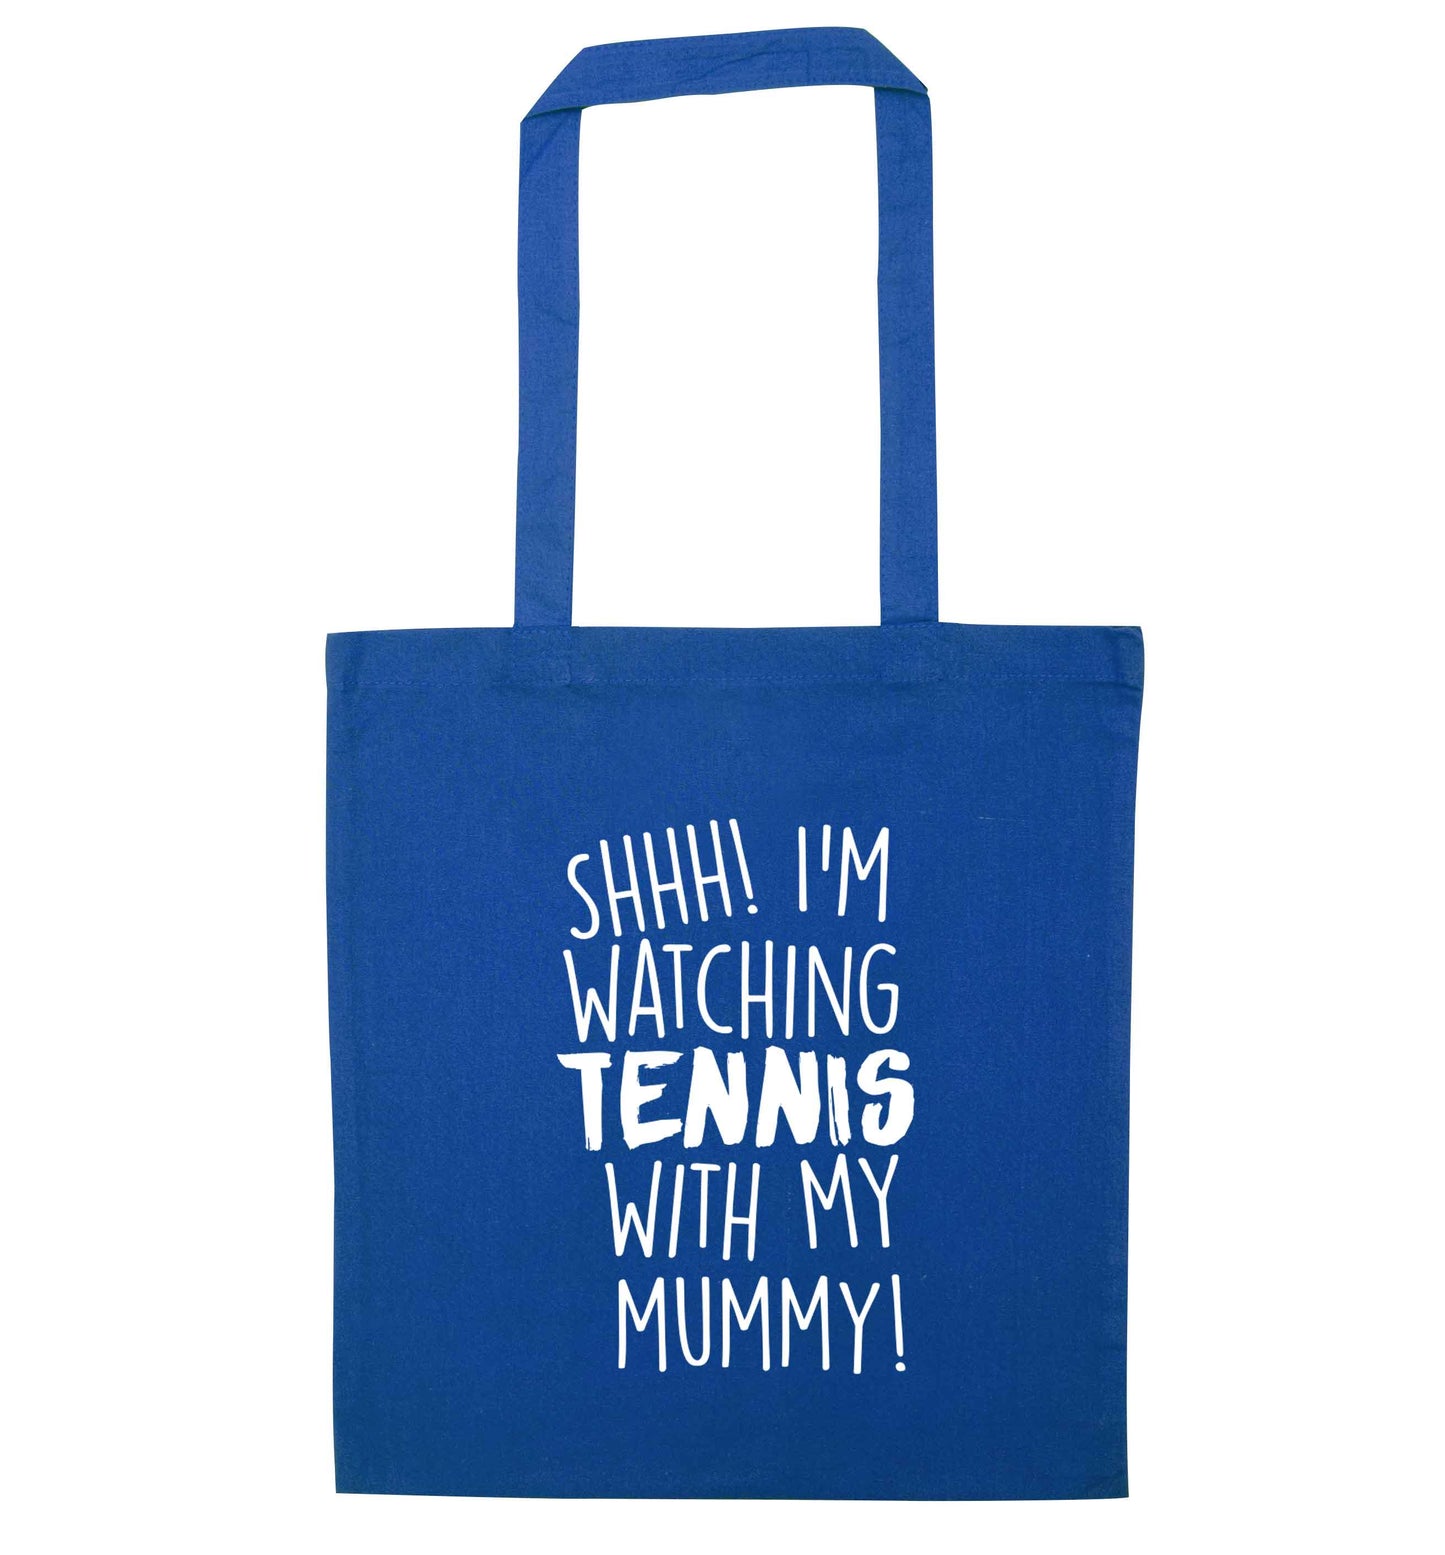 Shh! I'm watching tennis with my mummy! blue tote bag